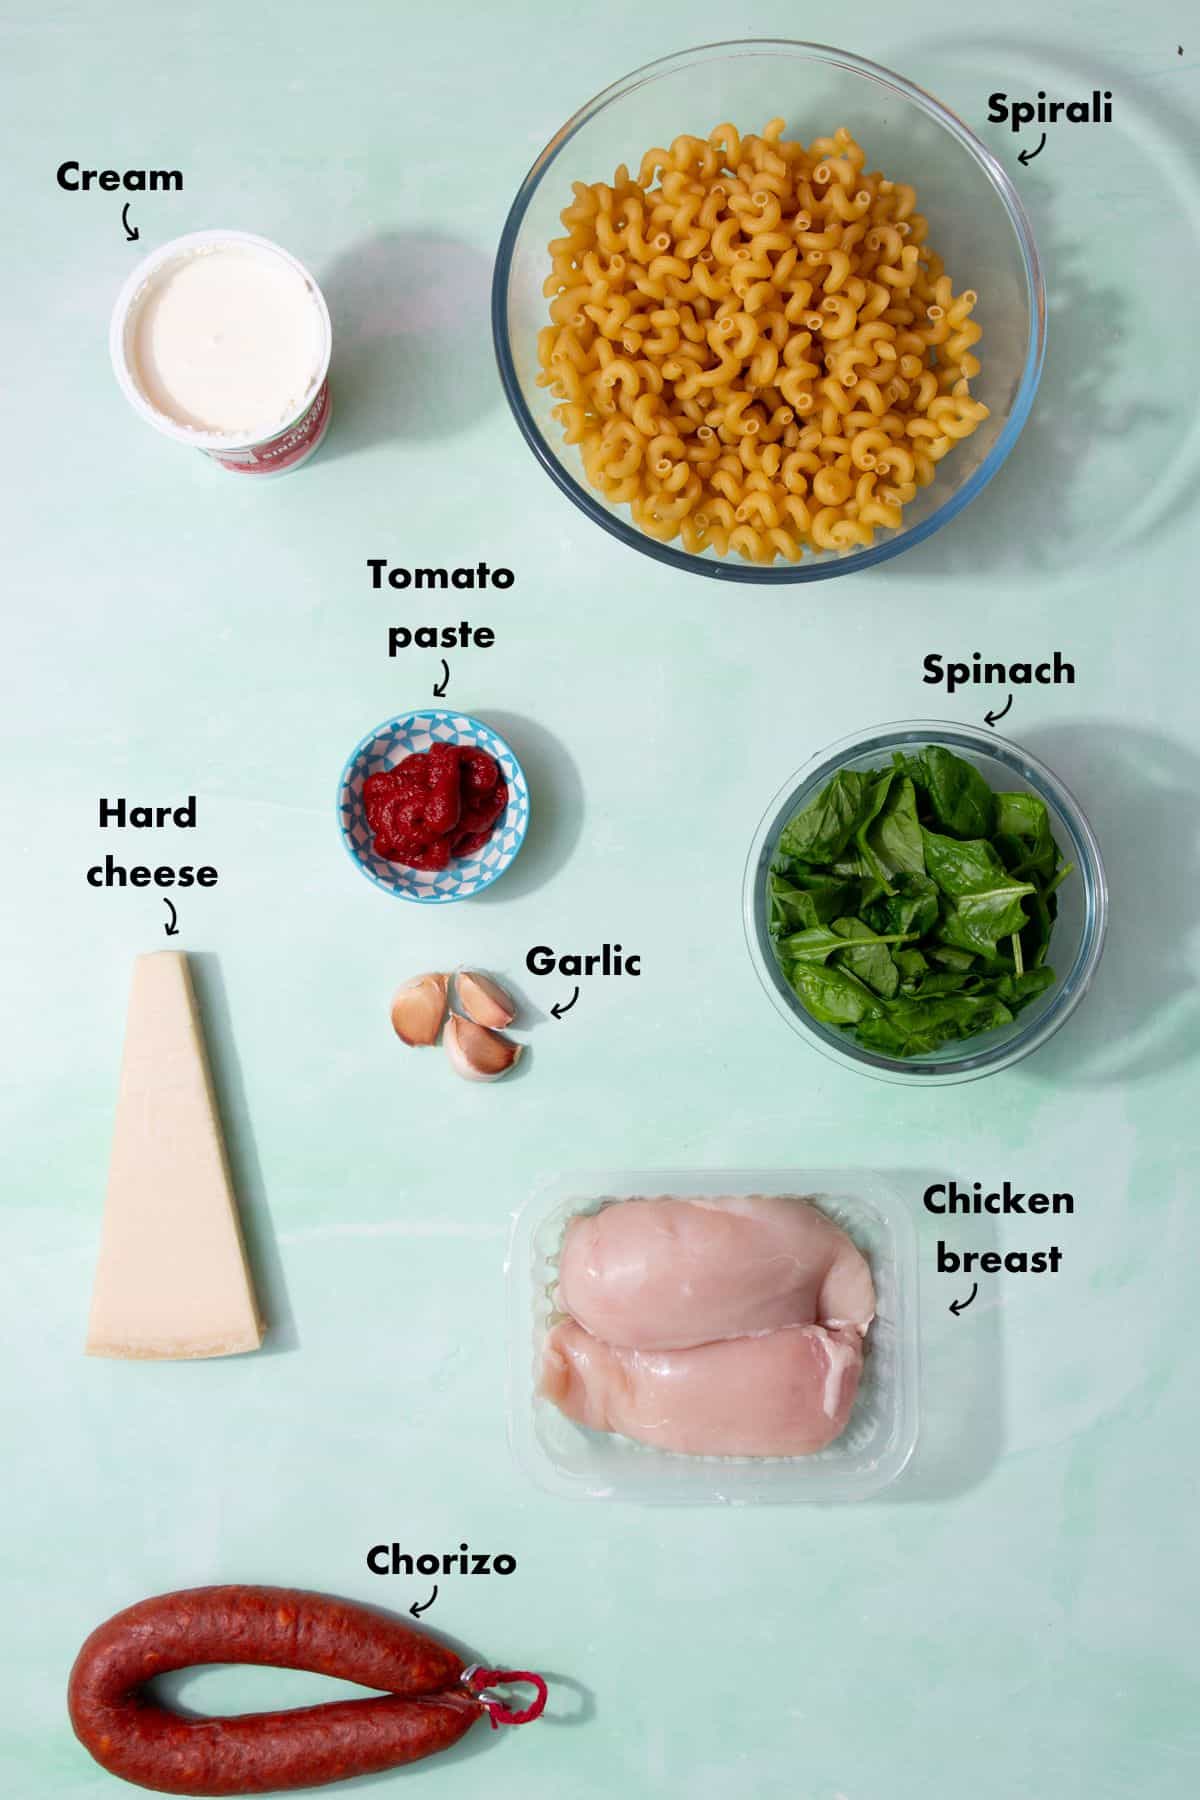 Ingredients to make the chicken and chorizo pasta recipes laid out on a pale blue background and labelled.